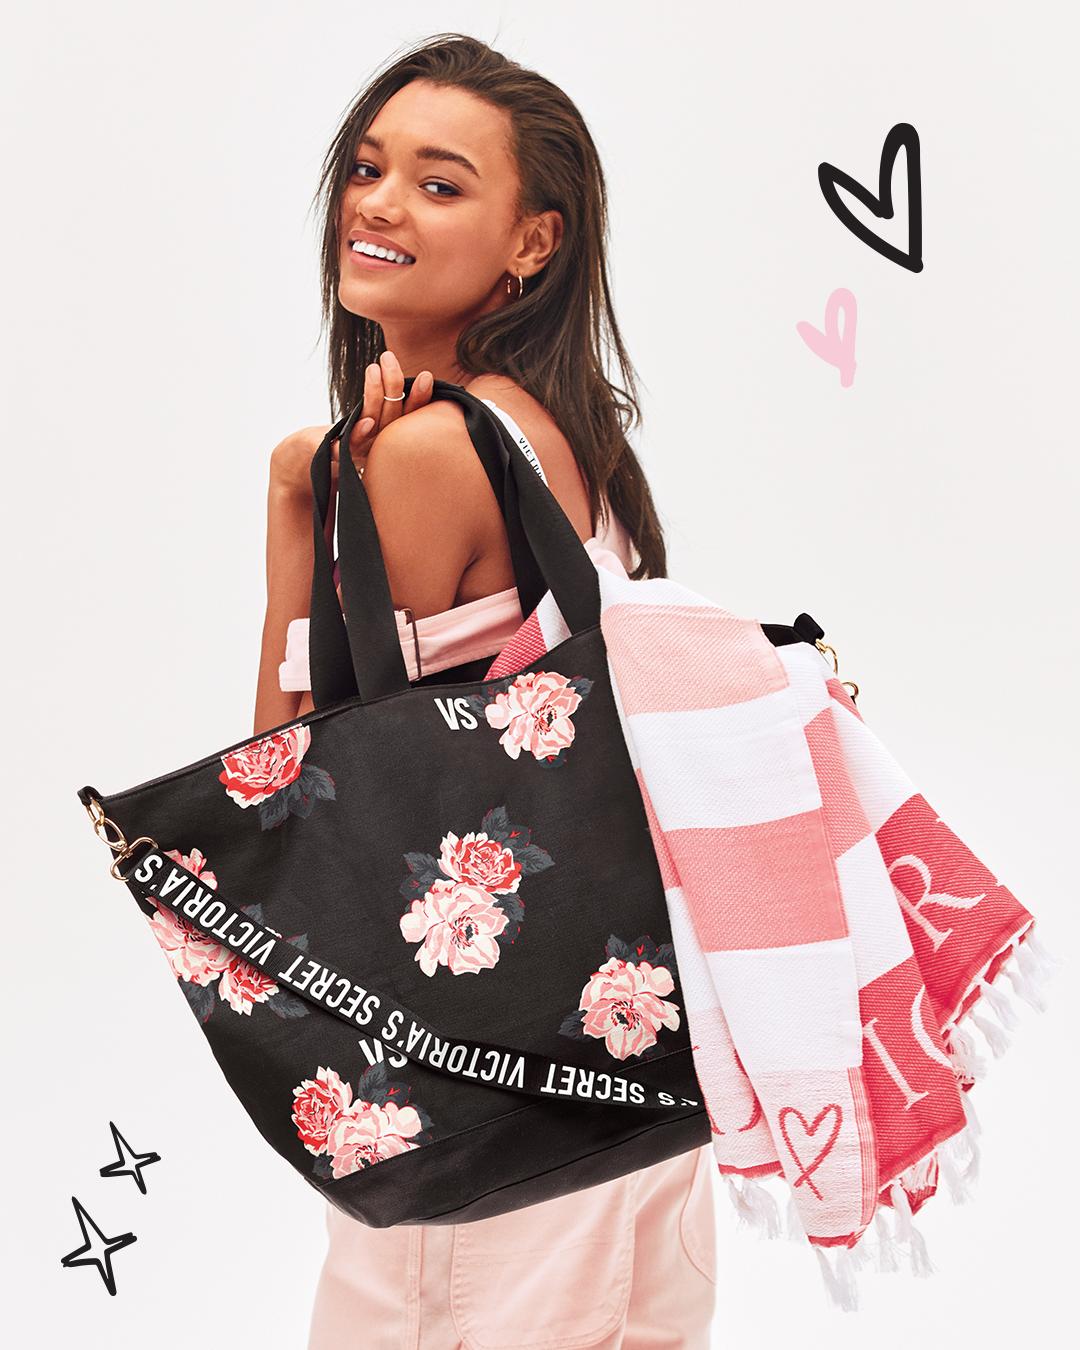 Victoria's Secret - Because everyone loves options: get a FREE tote with  $75 purchase OR a free blanket with $150 purchase! Excl apply